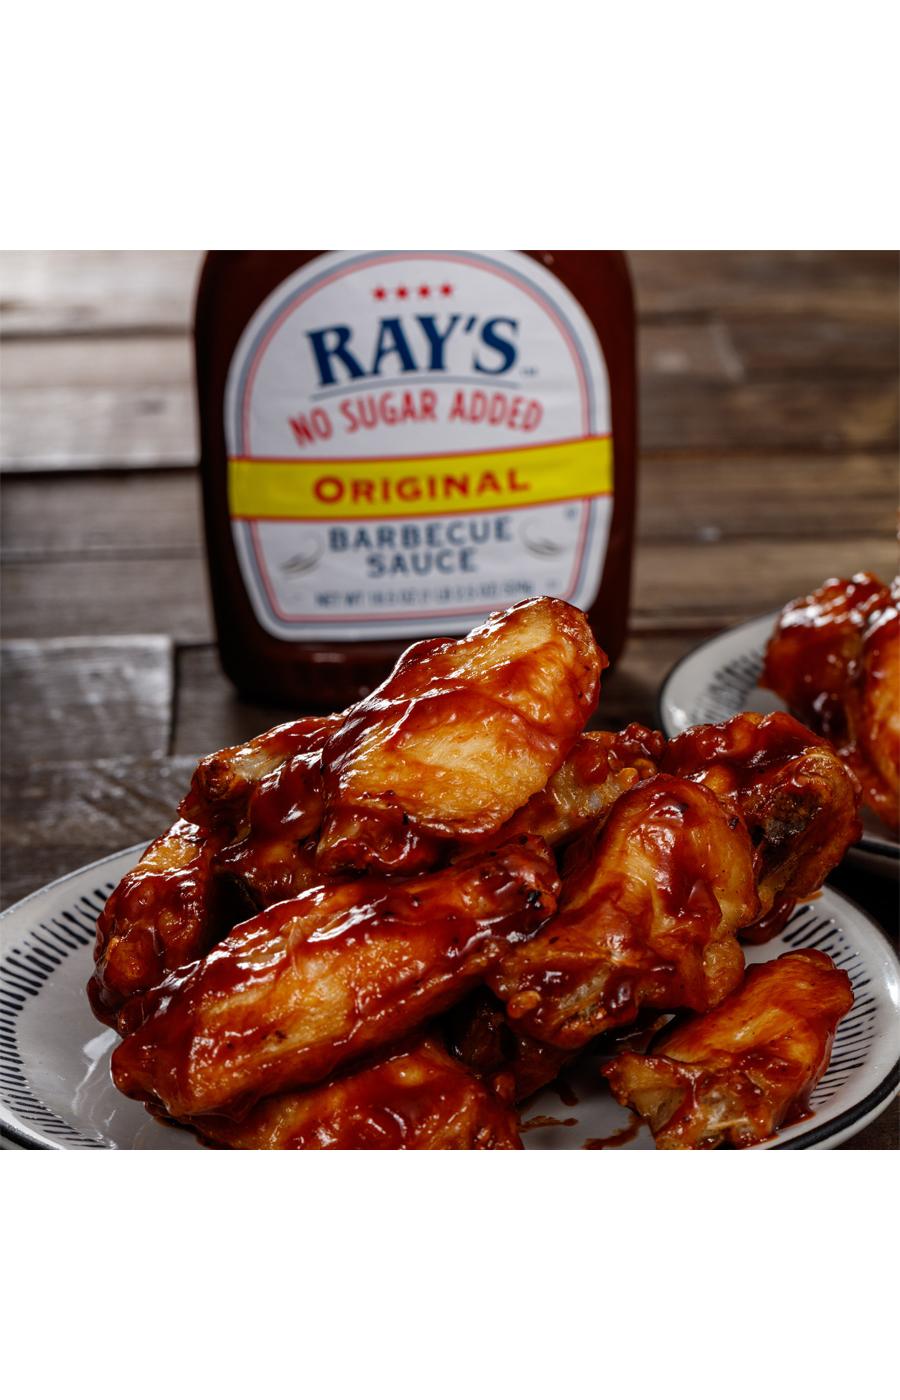 Sweet Baby Ray's No Sugar Added Original Barbecue Sauce; image 3 of 4